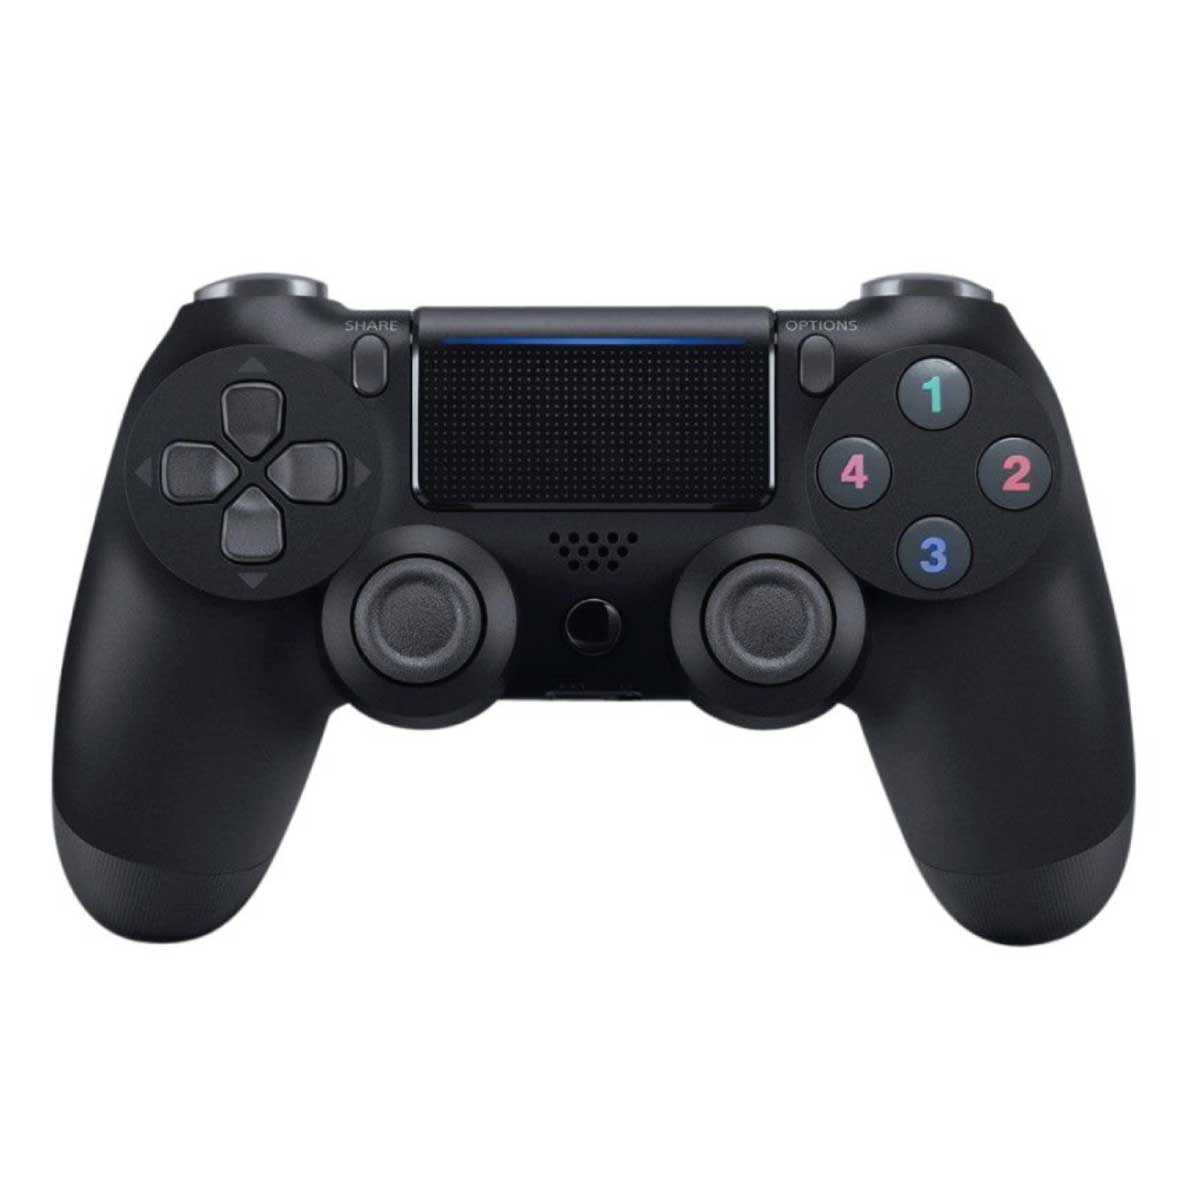 PlayStation 4 Wireless Double-shock Controller